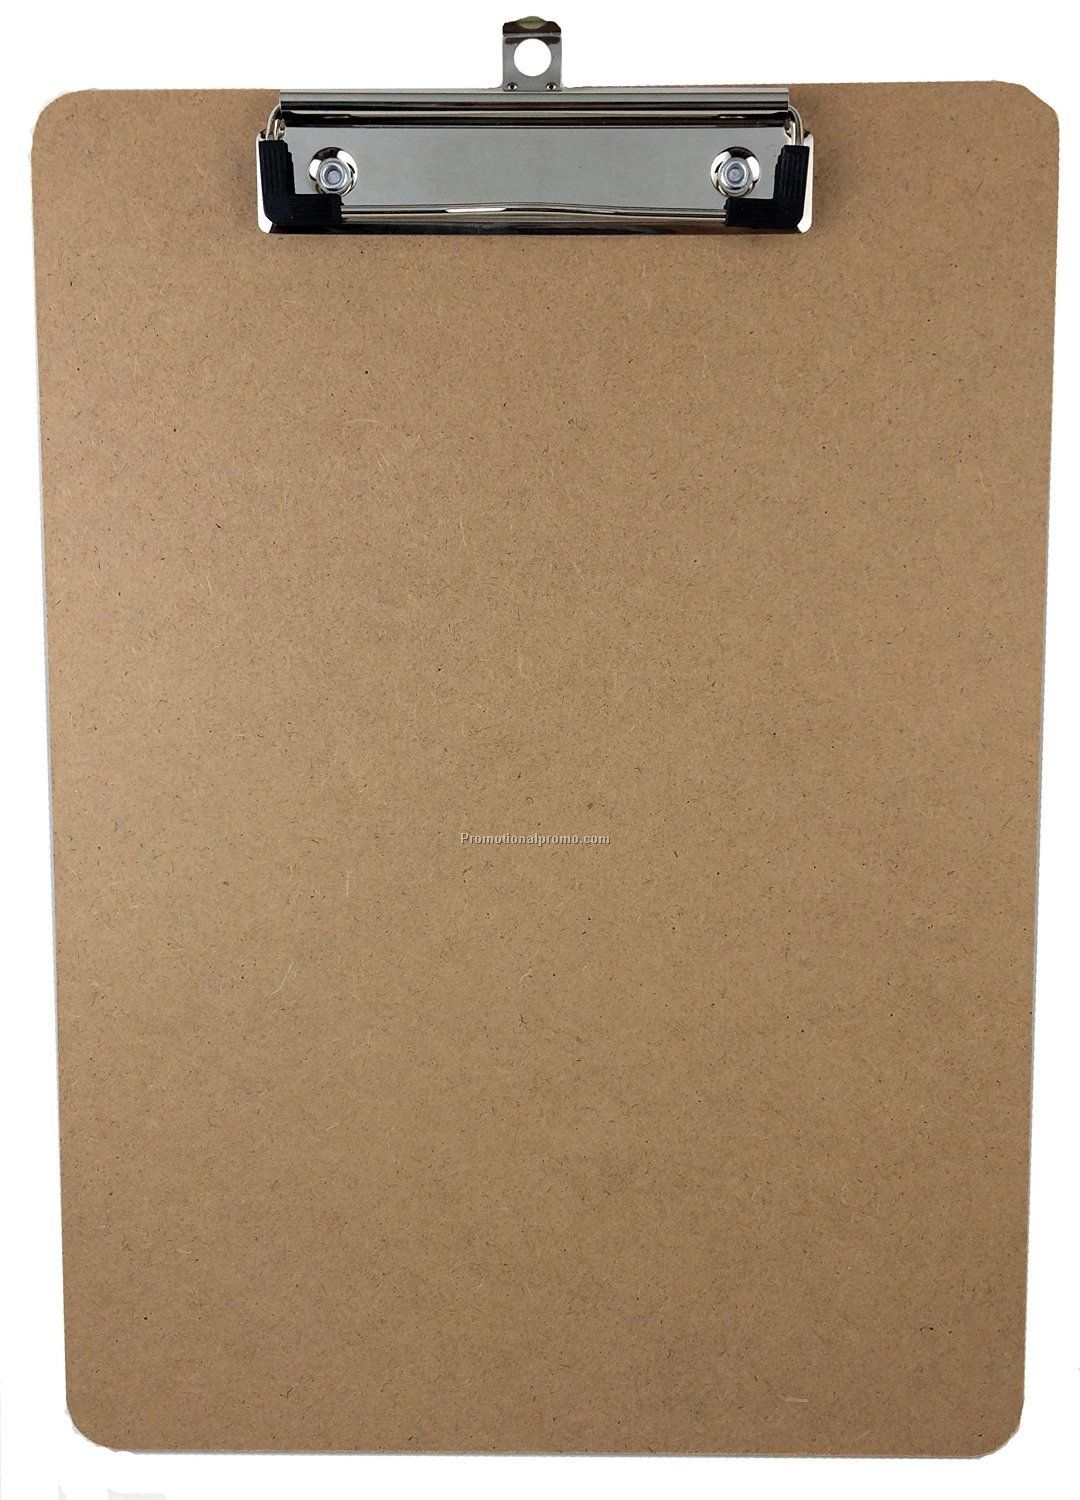 Letter Size Clipboard with Low-profile clip